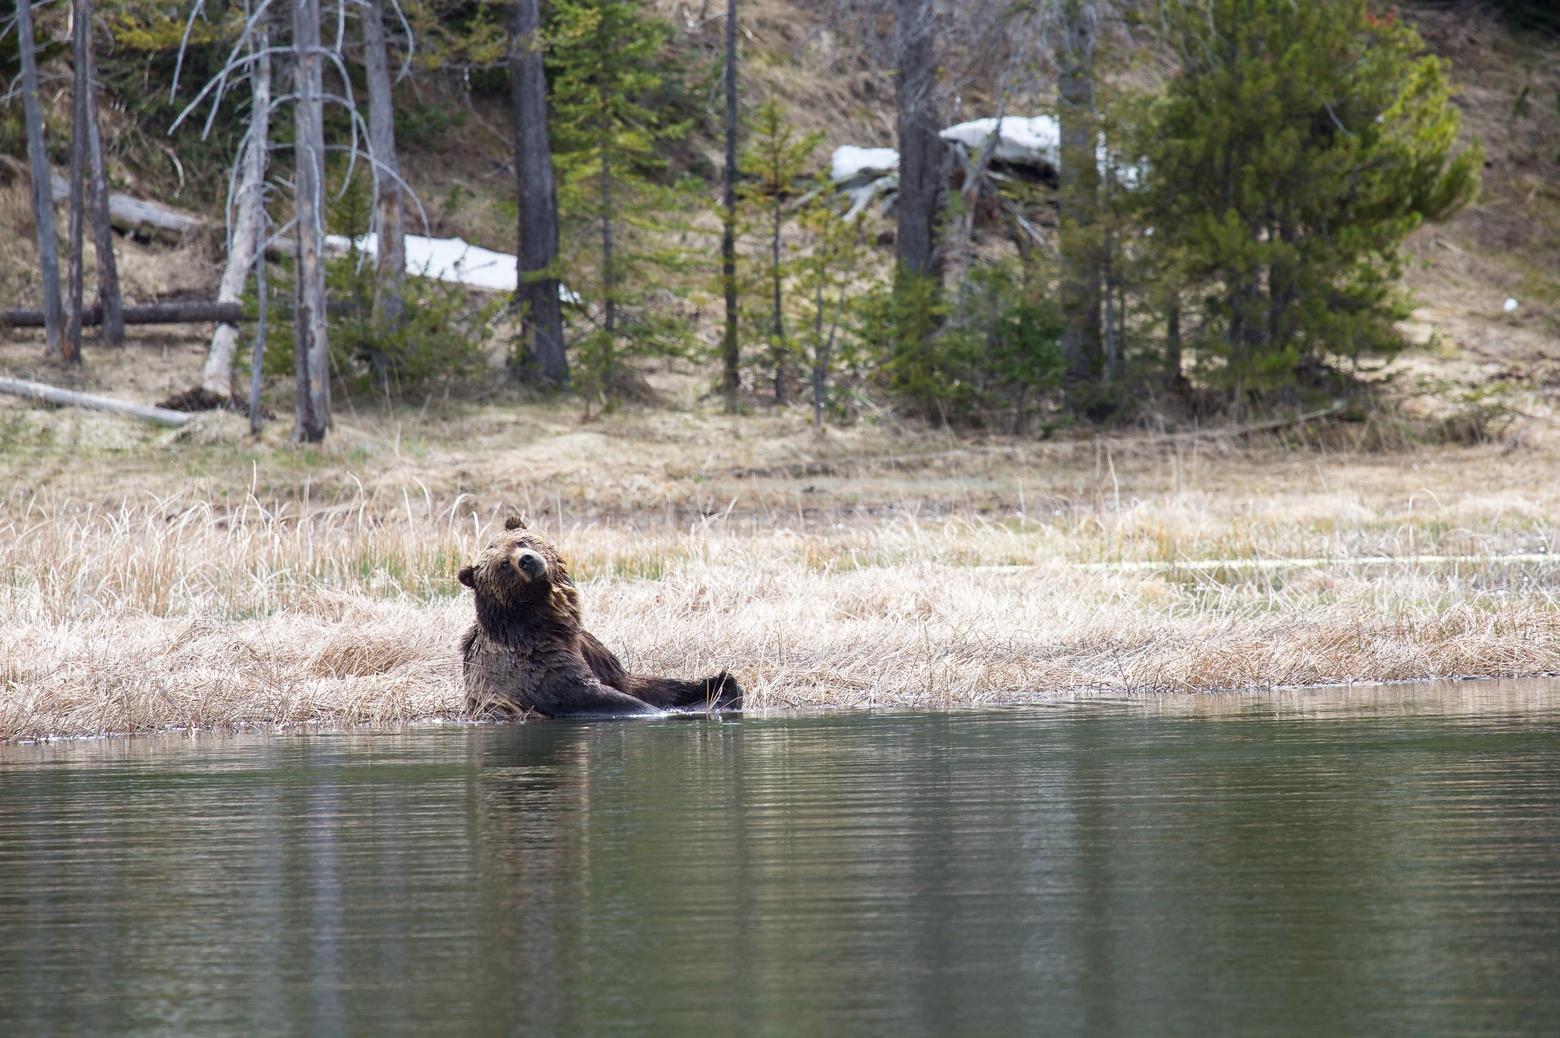 A grizzly cools off in a Yellowstone wetland. Shaking off dangerous heat can be done with a dip, where water enough is available—and readily accessible. Photo by Neal Herbert/NPS